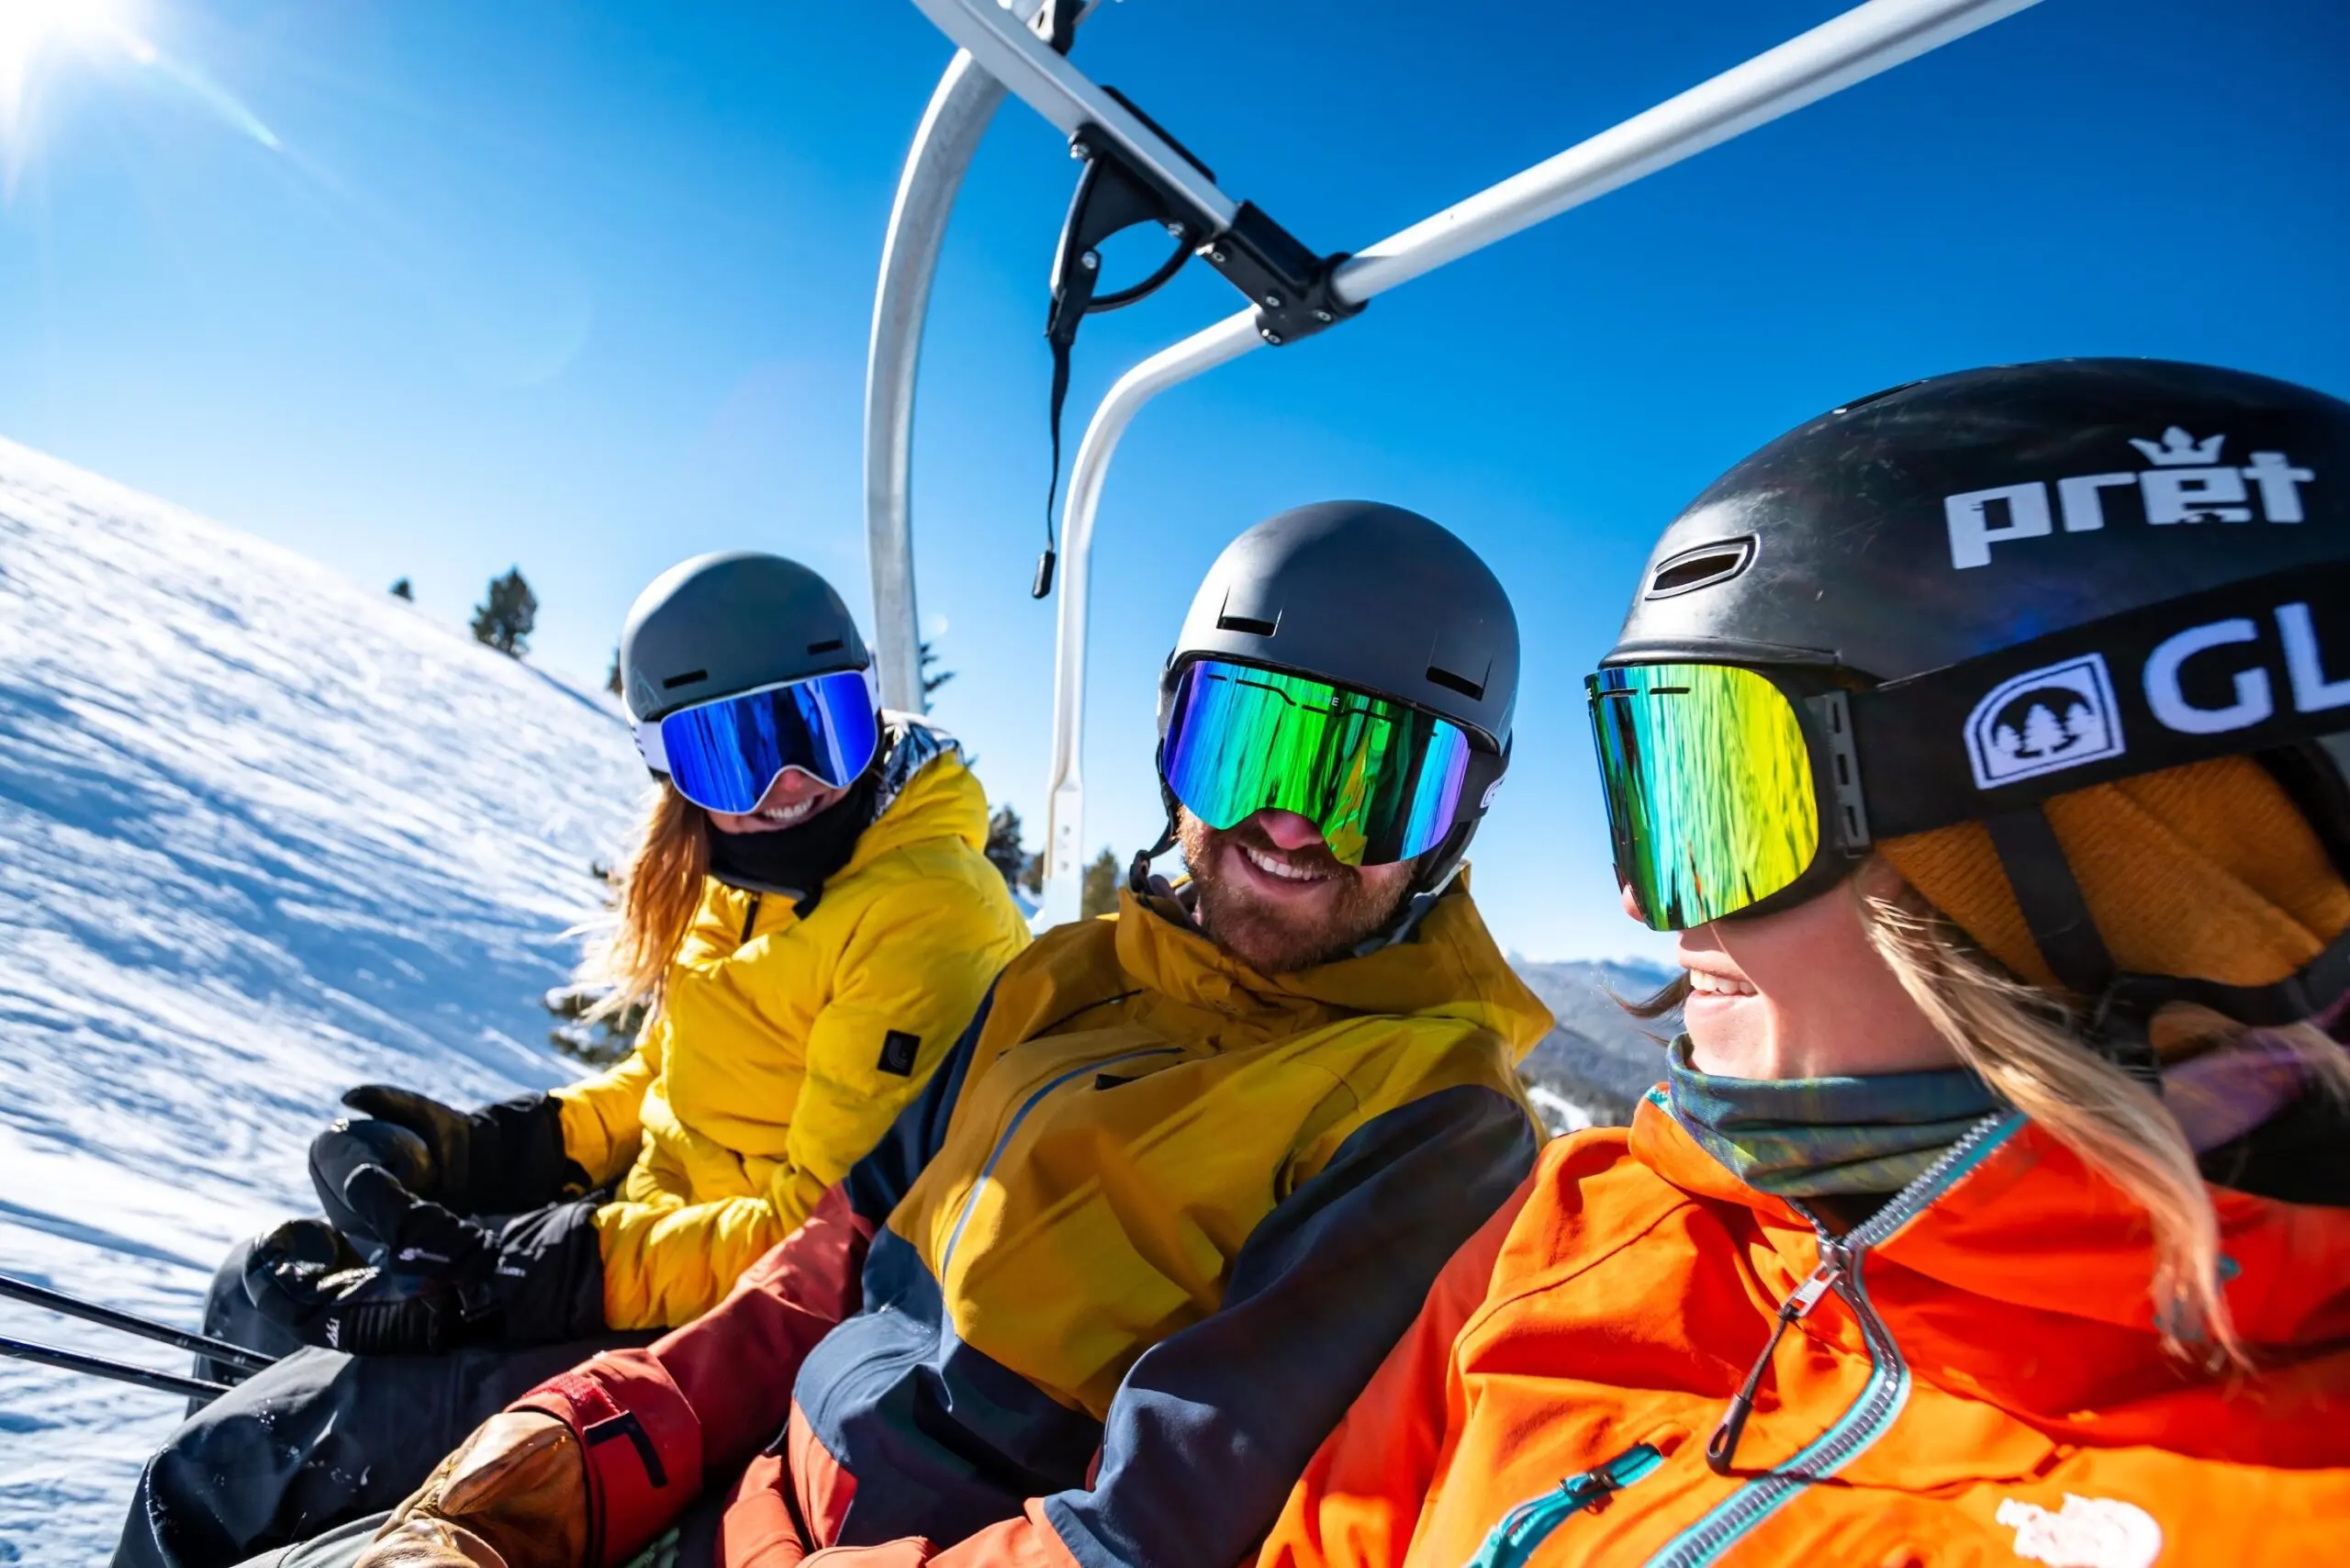 What Are the Best Sunglasses or Goggles for Snow Skiing?